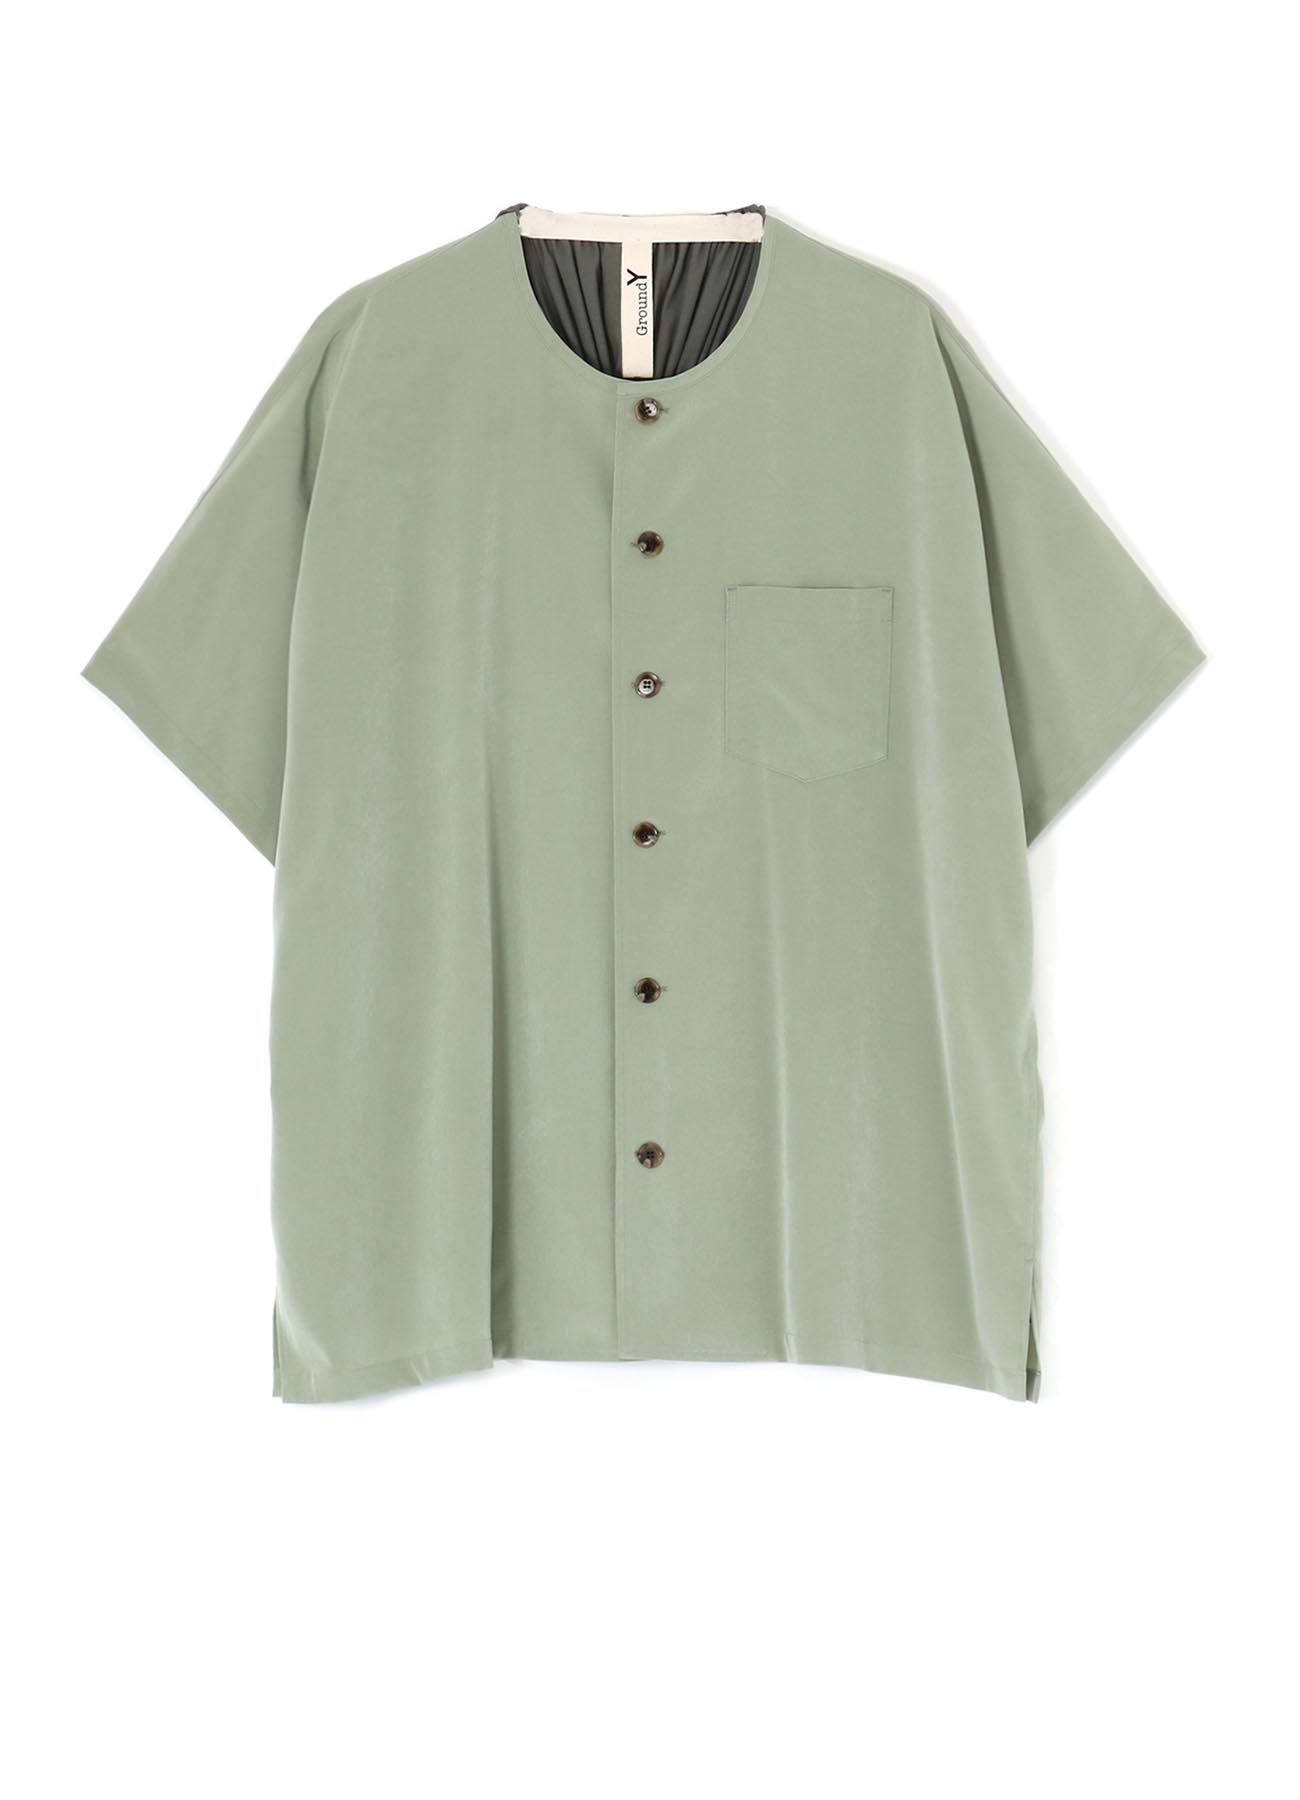 CREPE de CHINE + ULTIMA COTTON BUTTON-UP T-SHIRT WITH BACK GATHERS